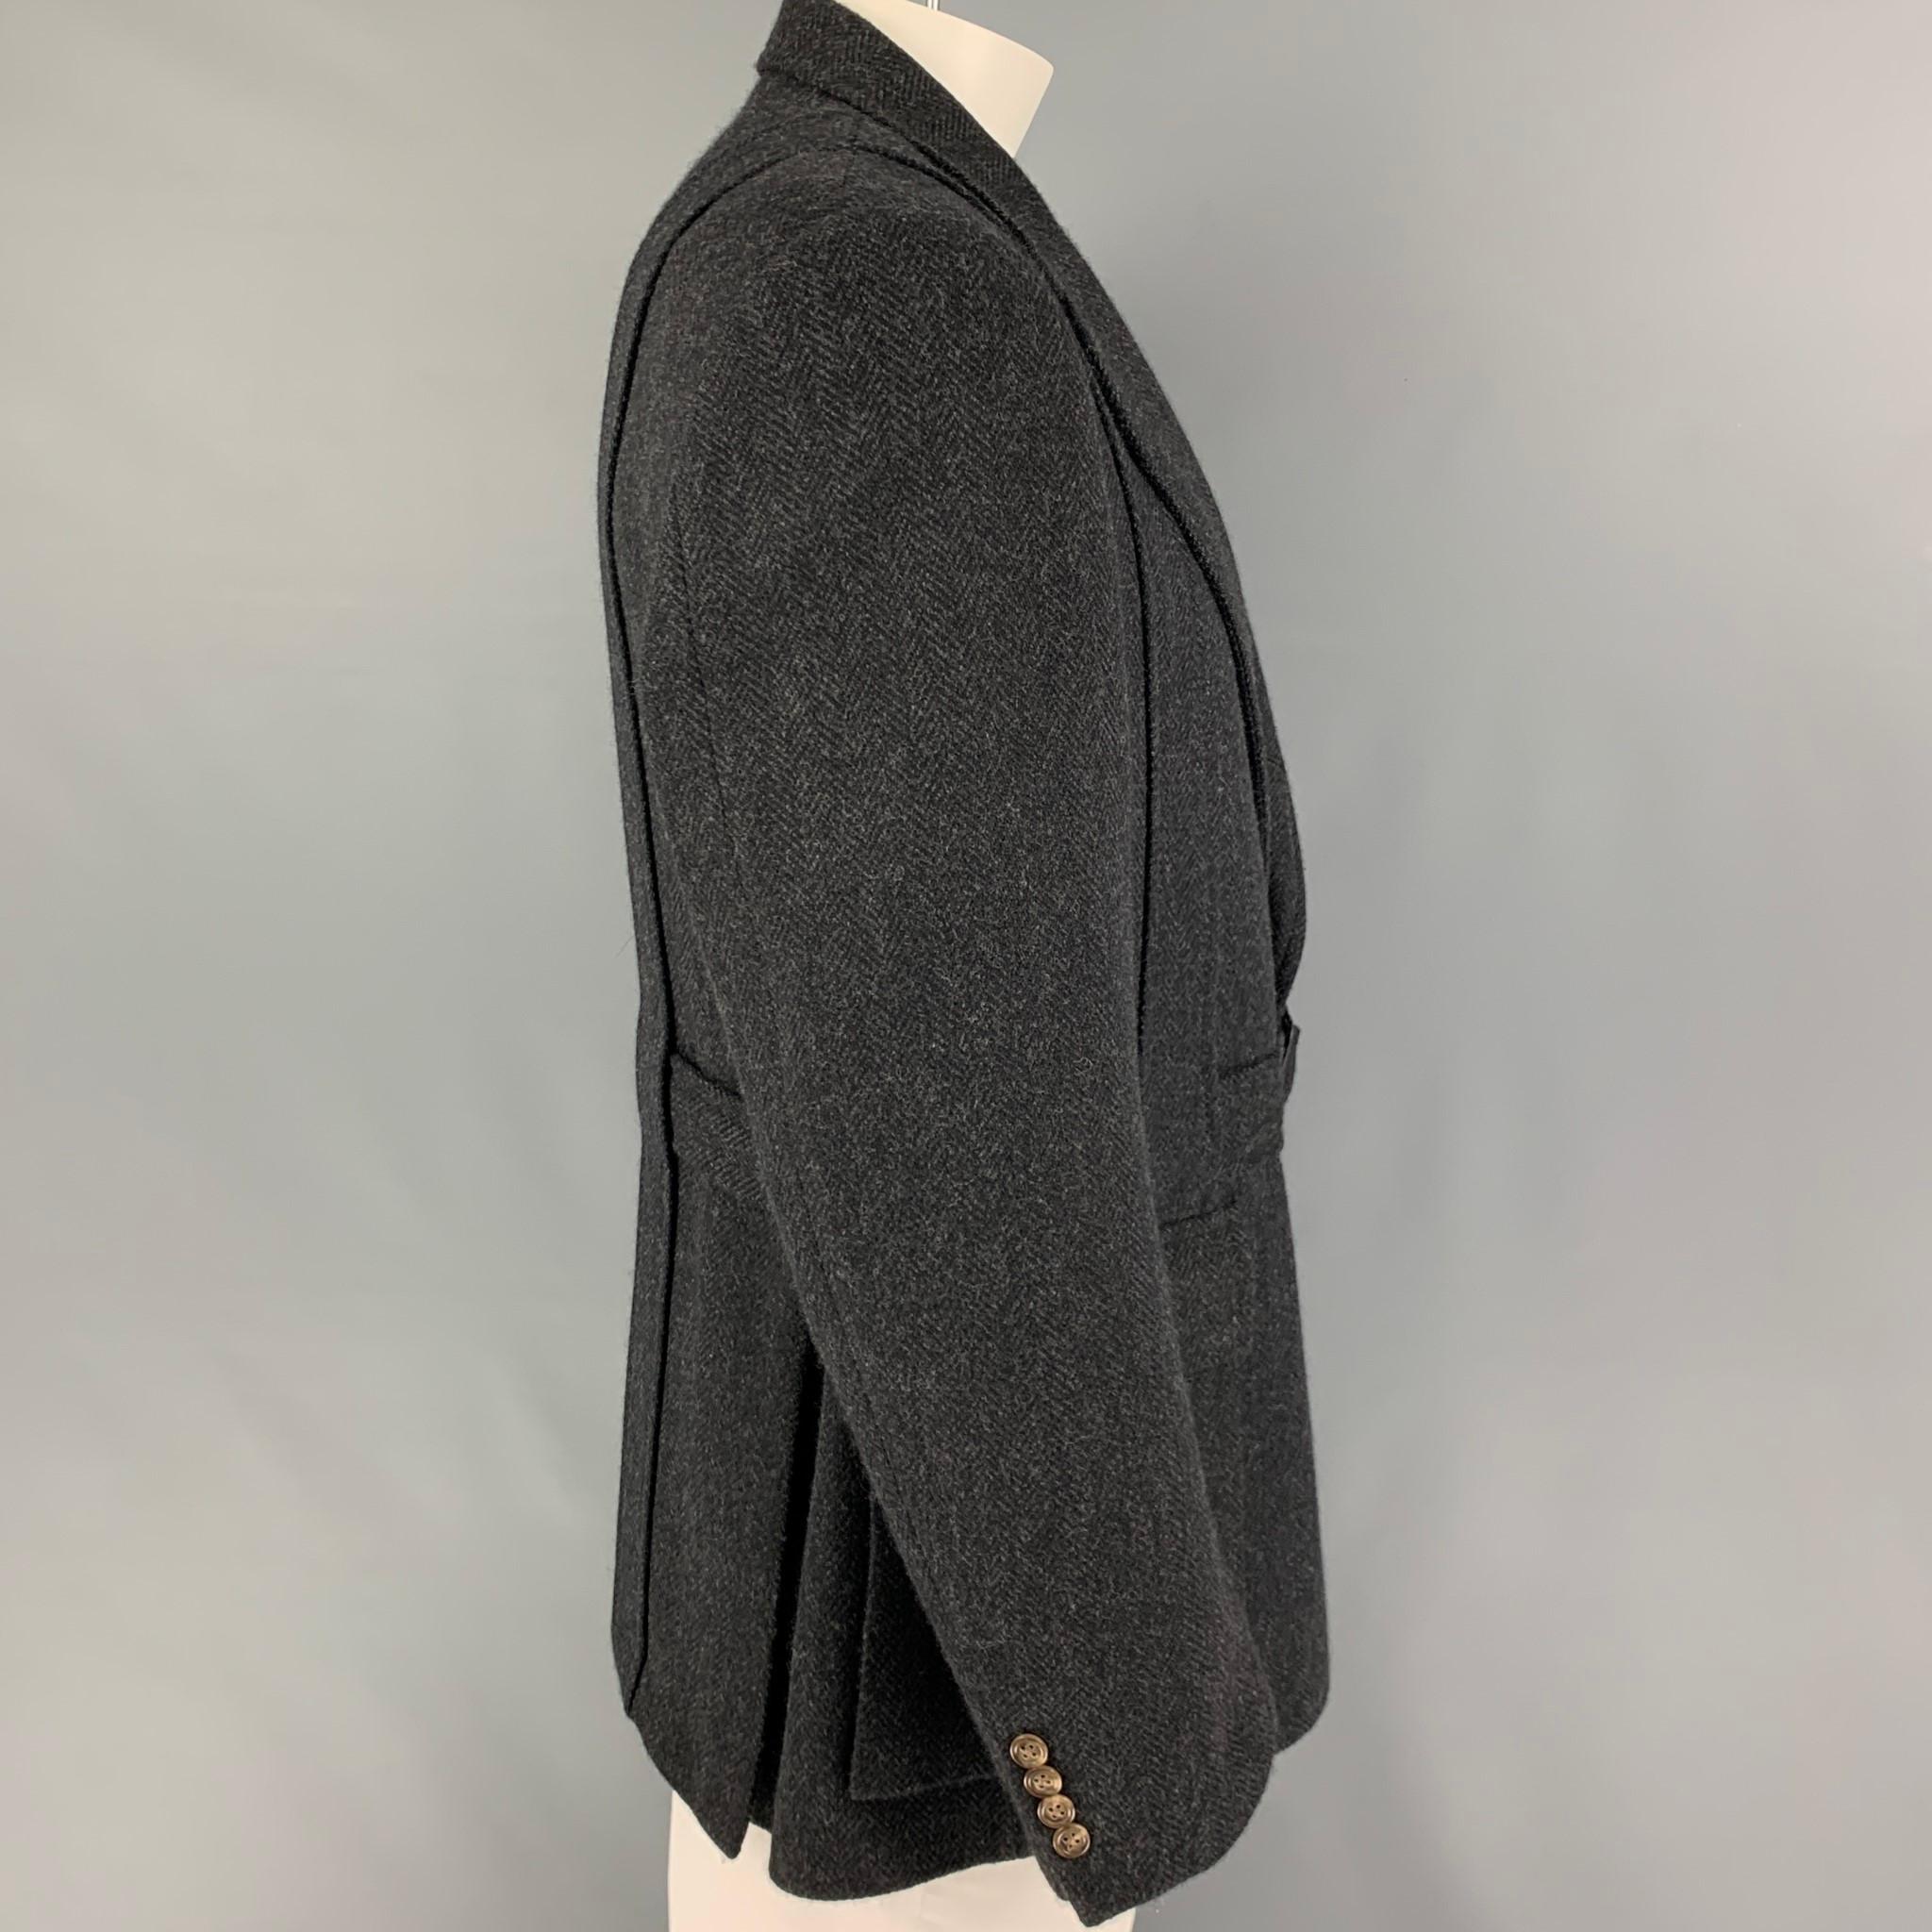 POLO by RALPH LAUREN coat comes in a dark gray herringbone virgin wool with a full liner featuring a belted style, notch lapel, flap pockets, and a buttoned closure. Made in Italy.

Very Good Pre-Owned Condition.
Marked: 46